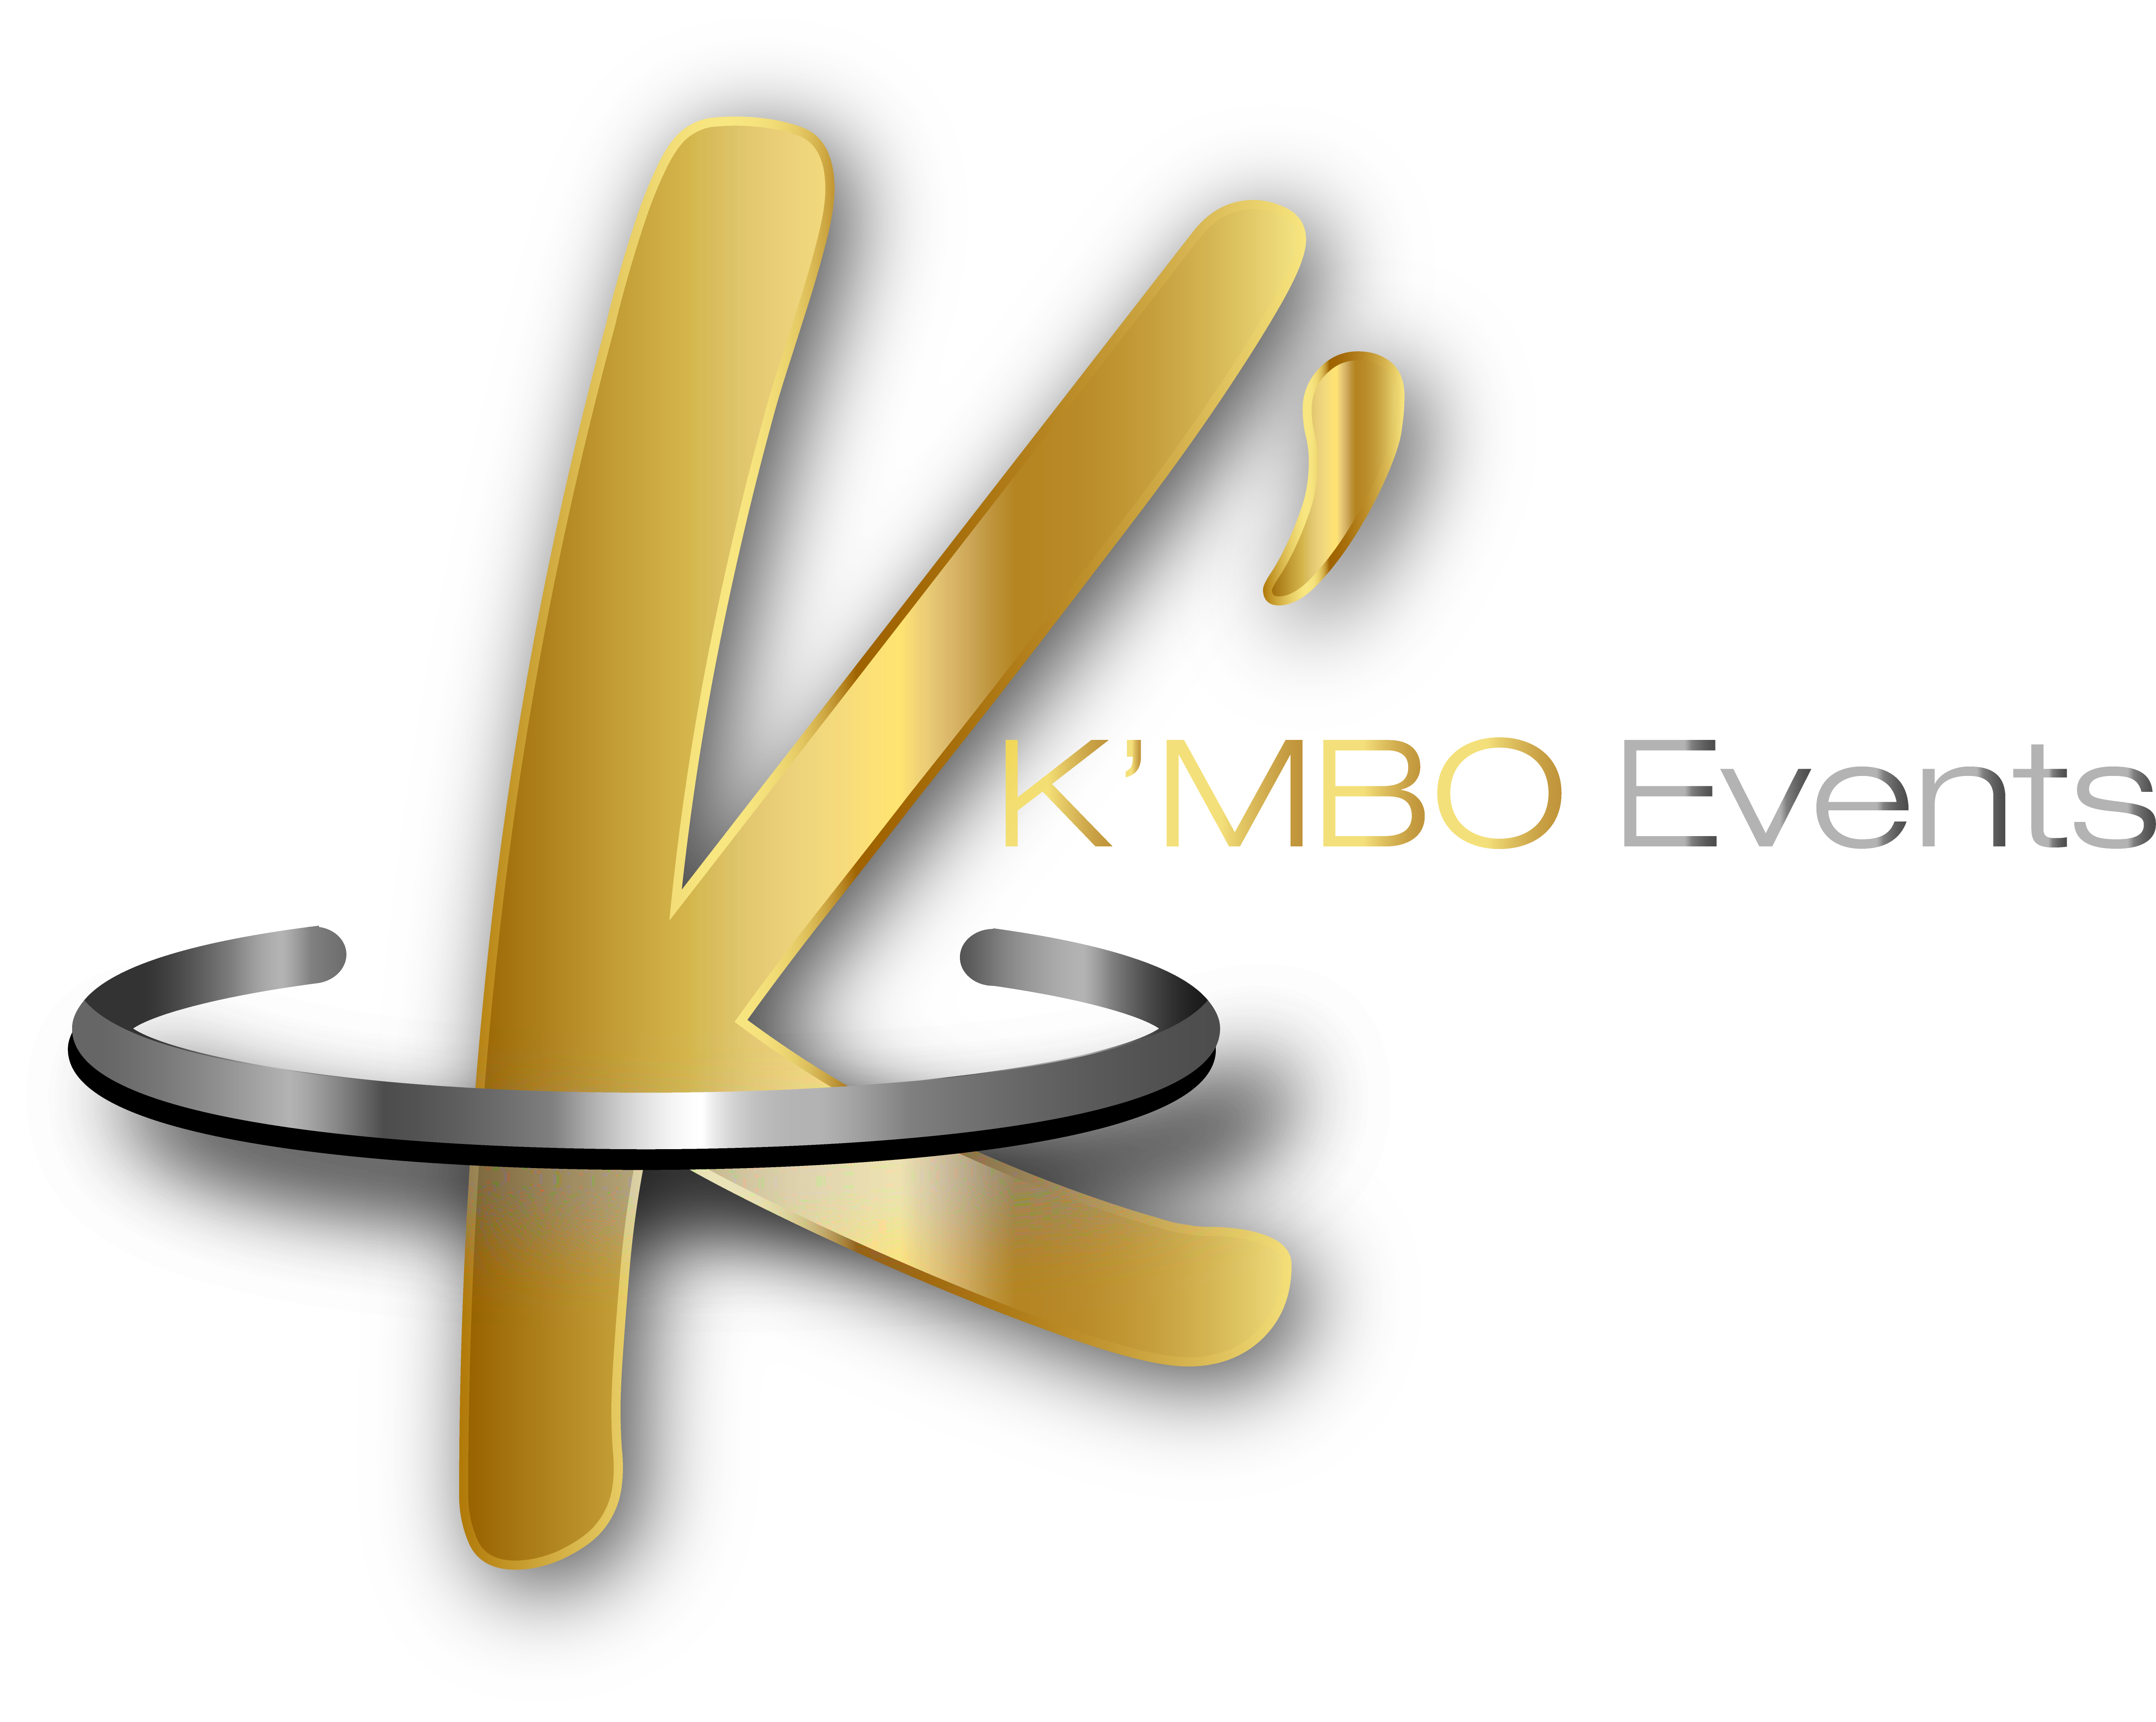 KMBO Events